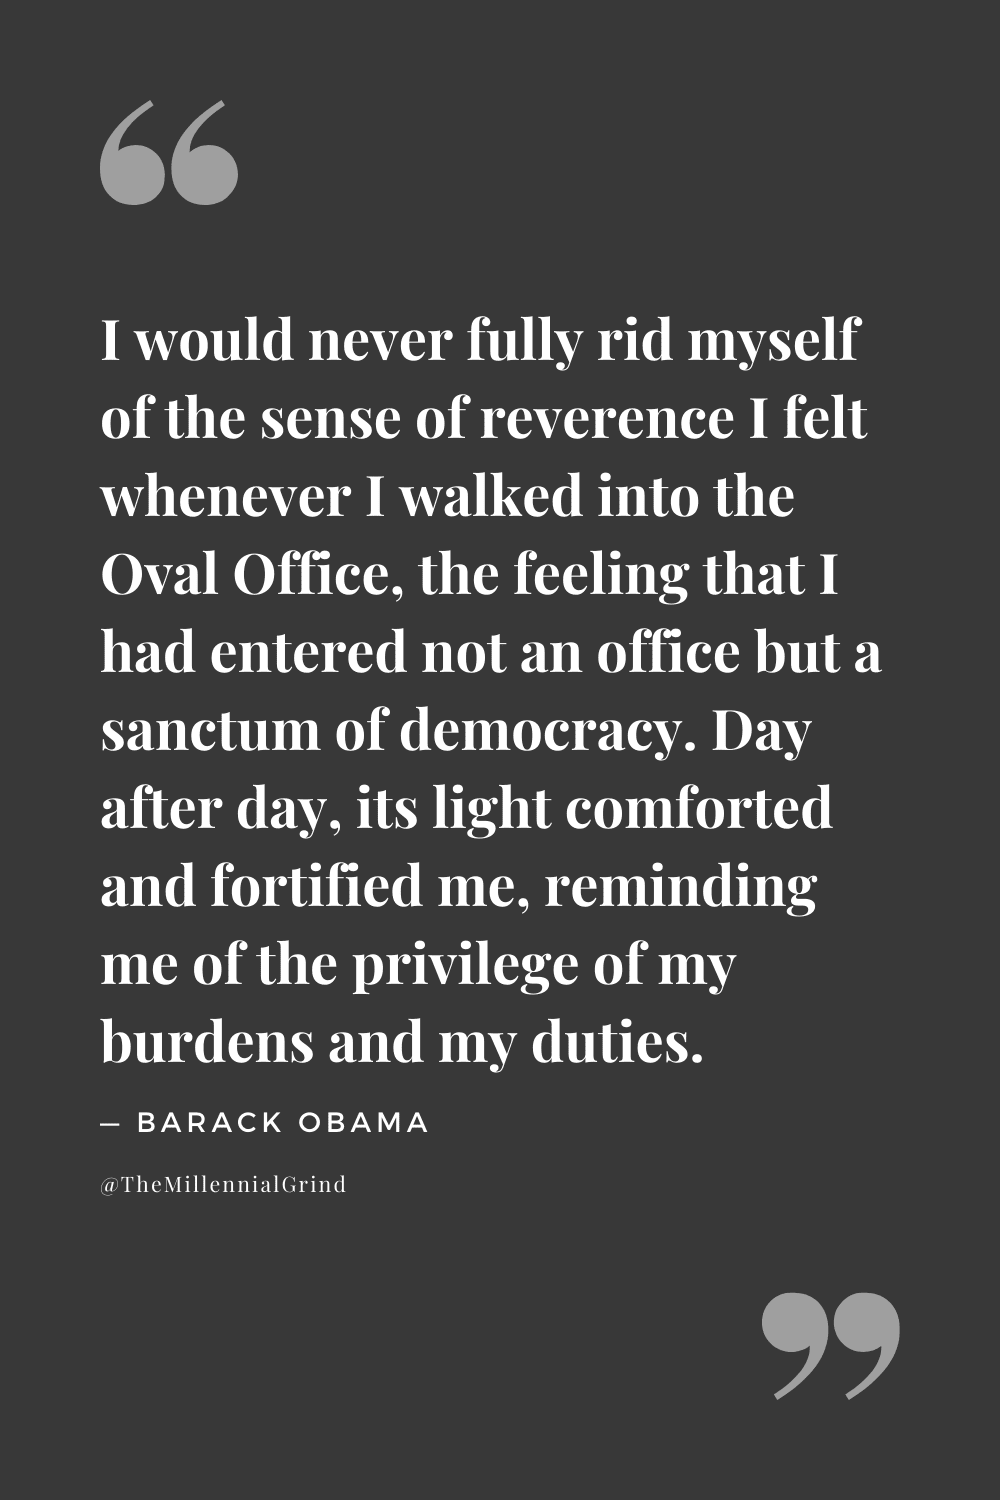 Quotes From A Promised Land by Barack Obama